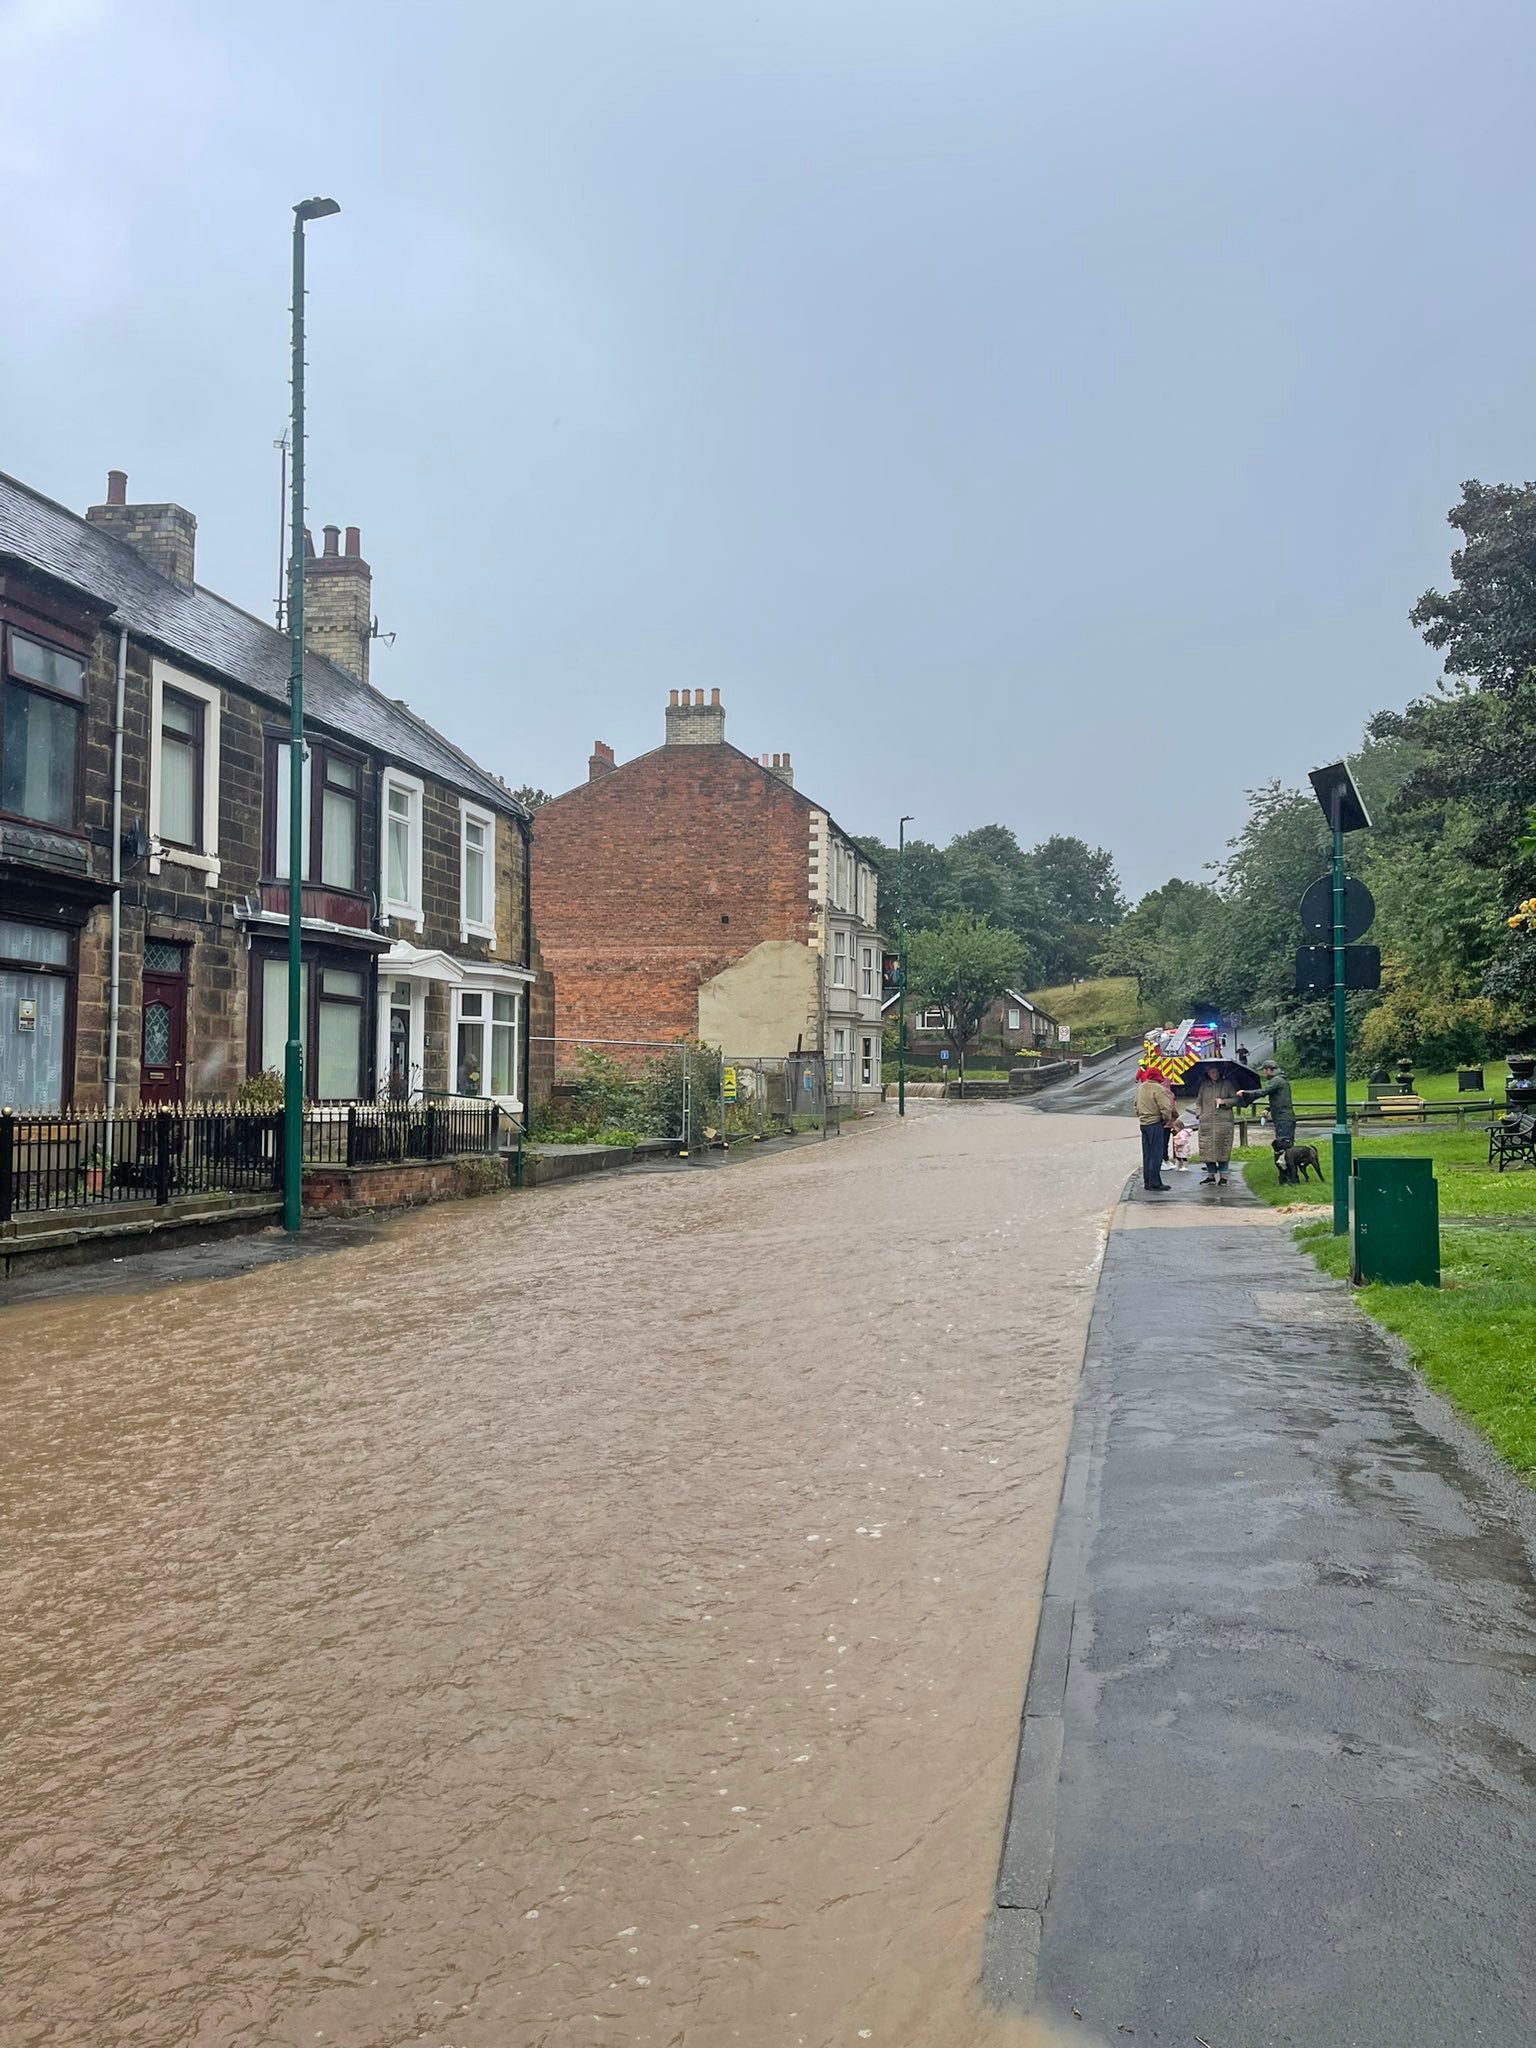 Loftus is among the many towns hit by flooding on Saturday